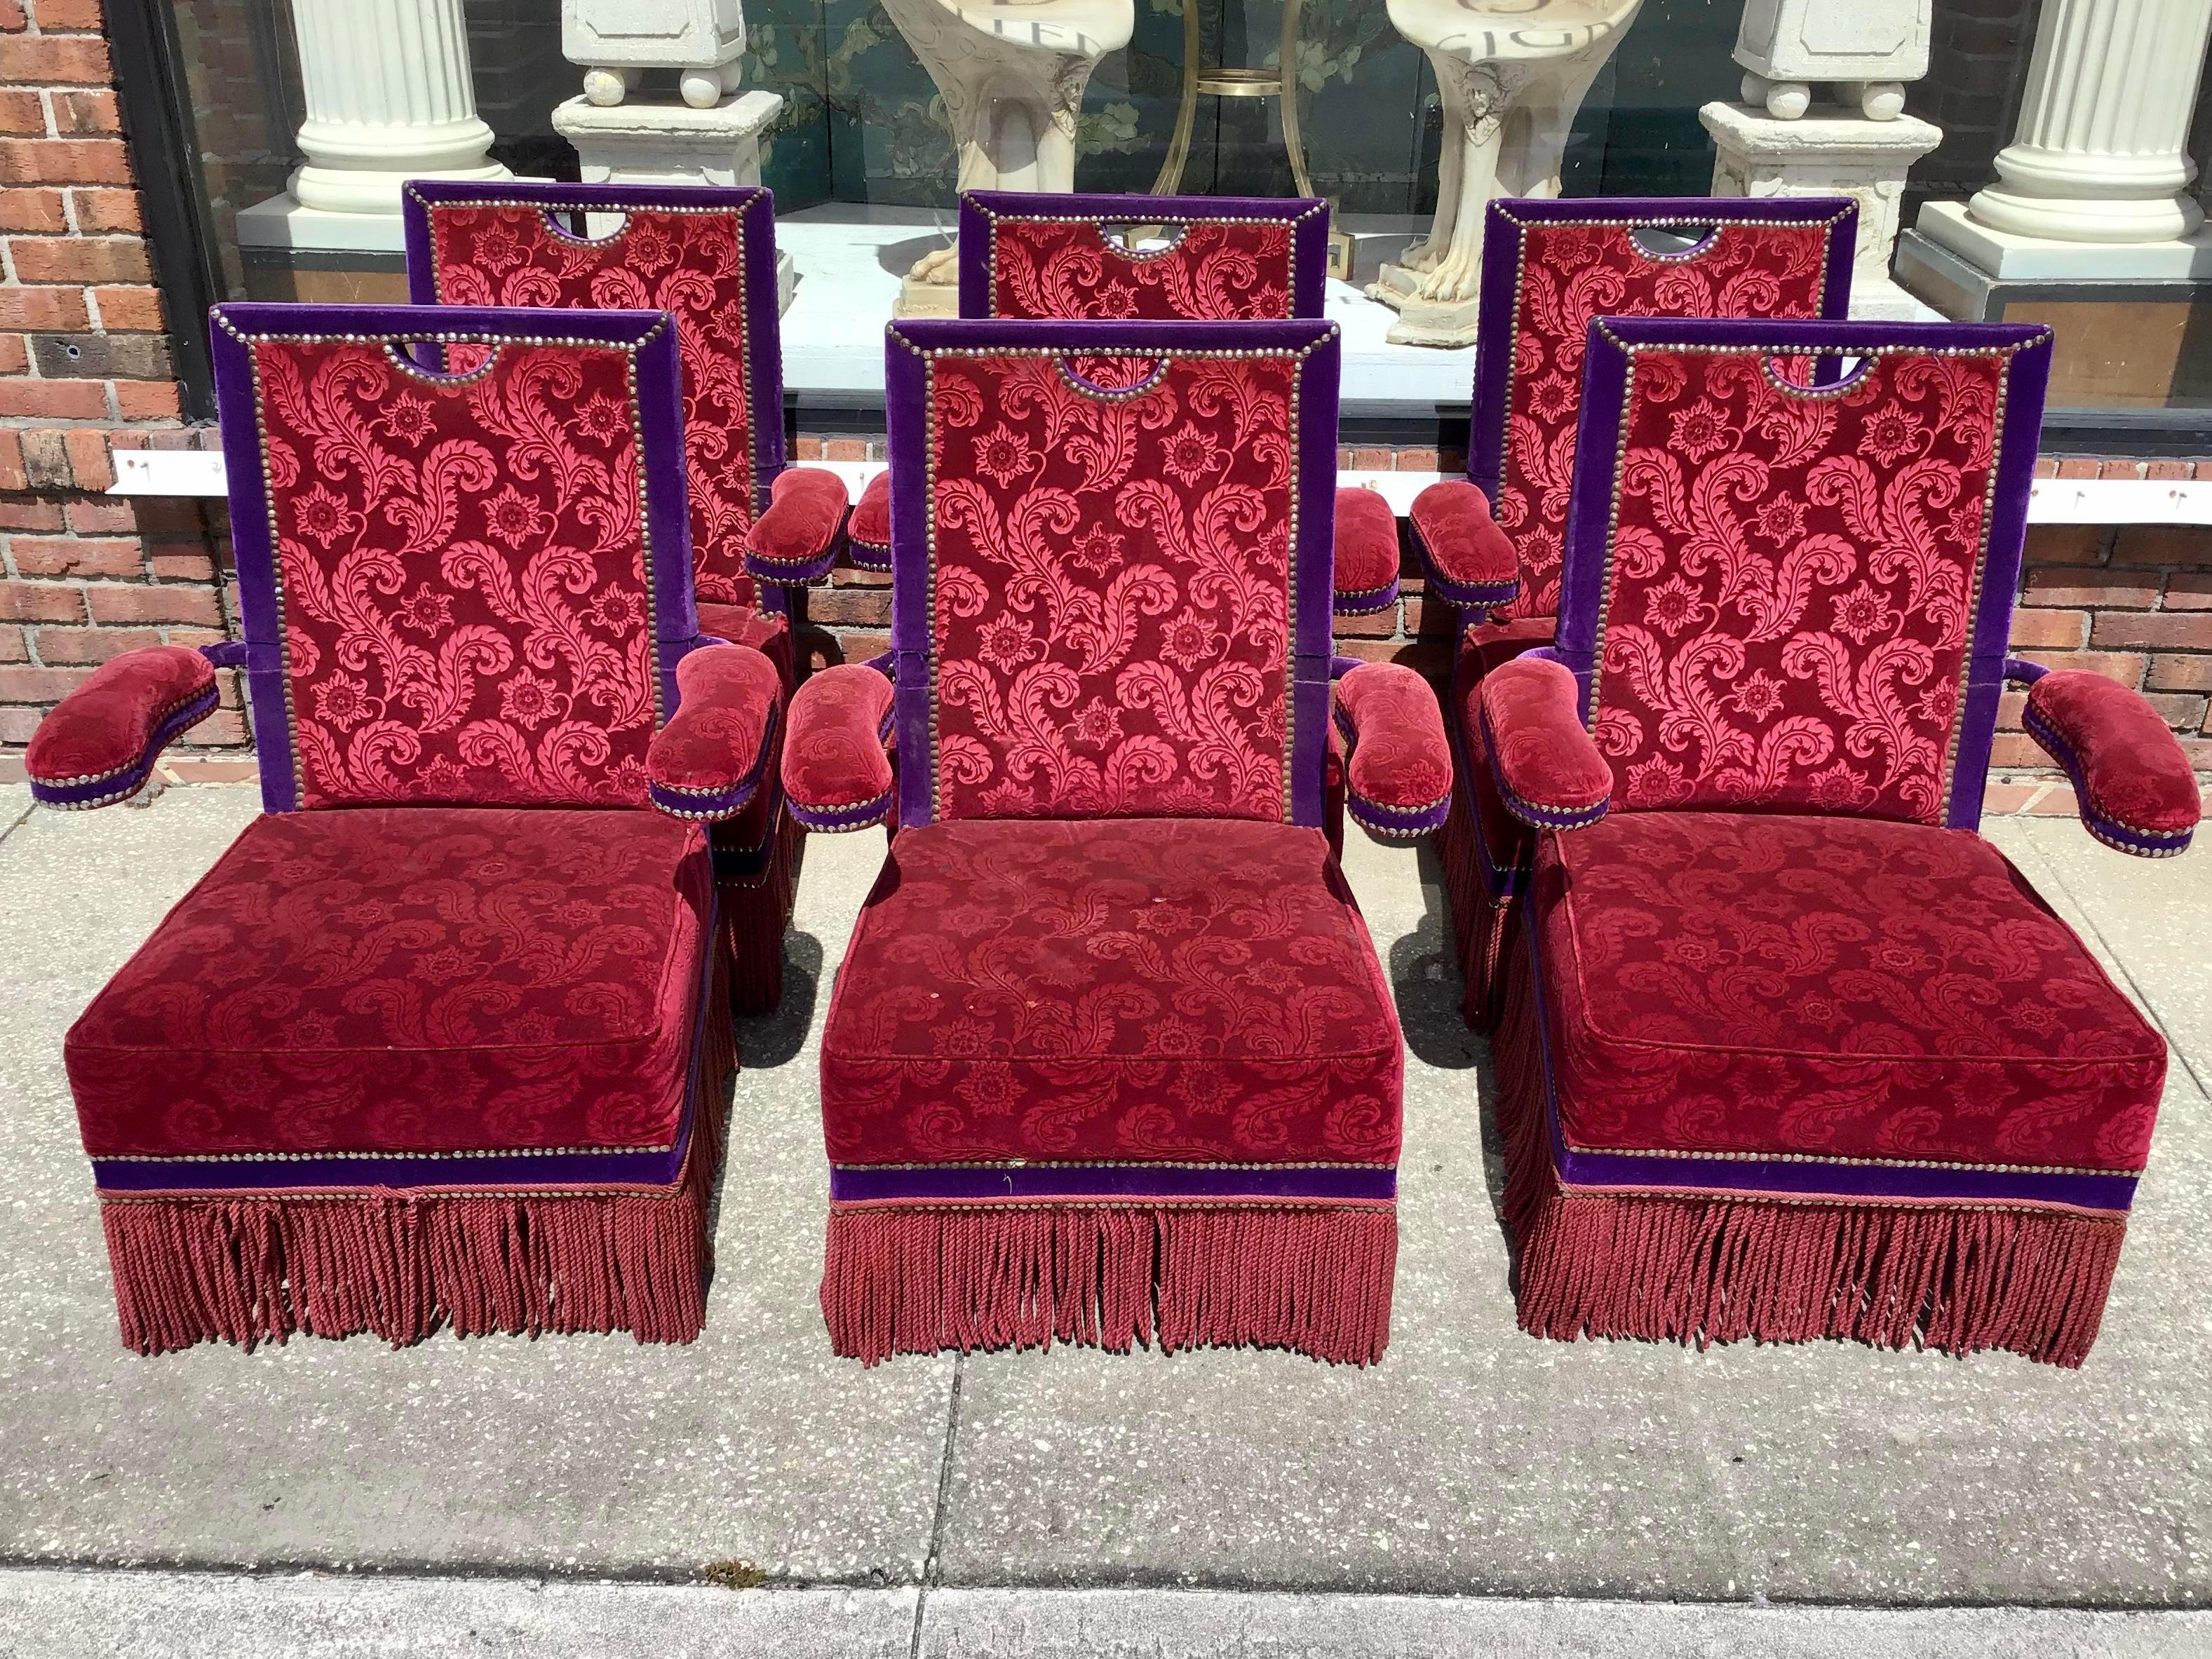 Amazing set of original French Jacques Garcia hotel costes club chairs. These would be a fun instant personal version of hotel costes Paris directly in your home! This is the original fabric so they have some age and tiny tears that could be